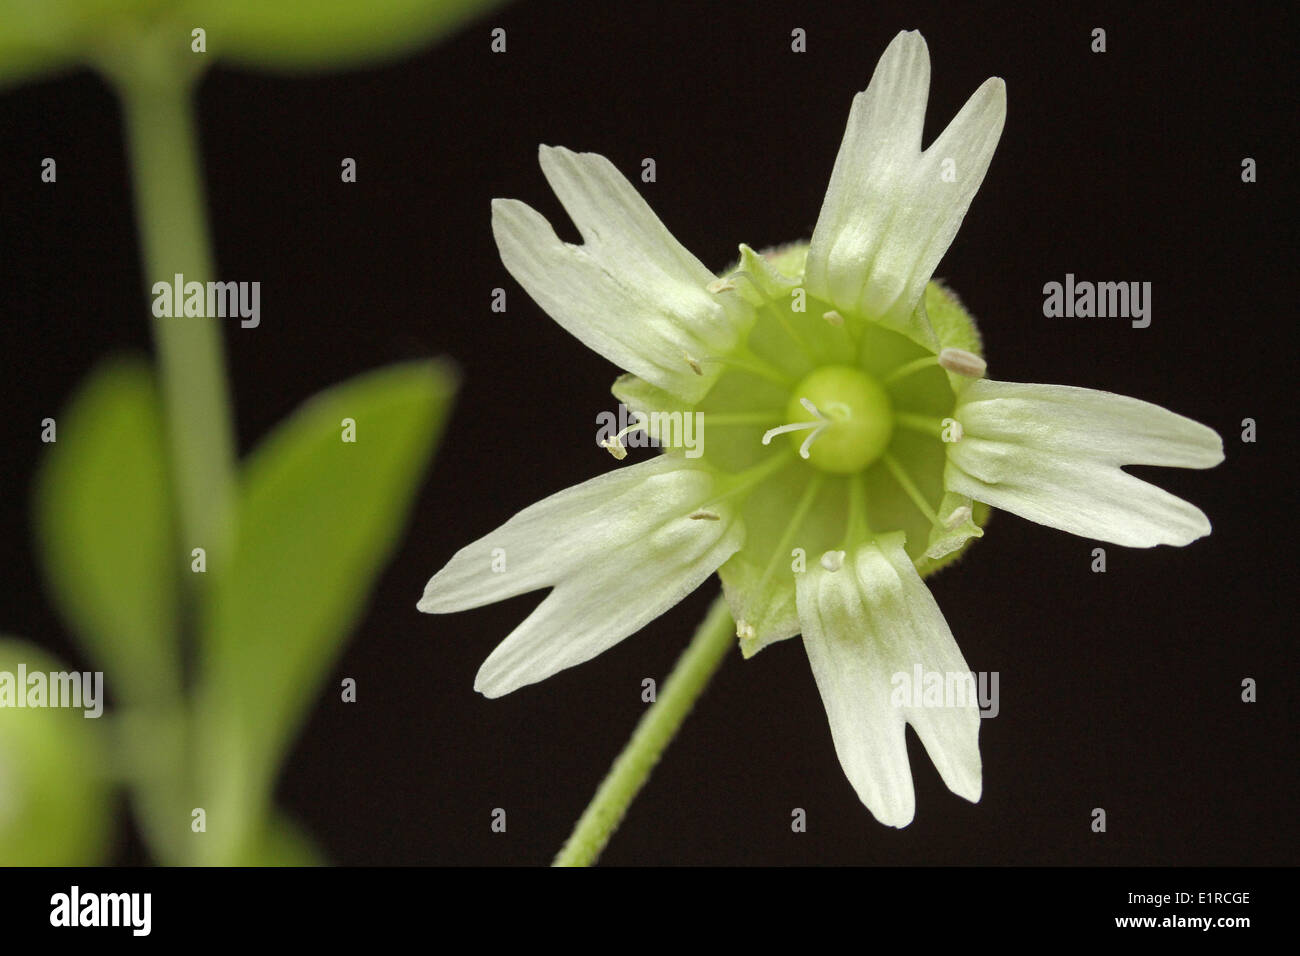 frontal view of the Berry Catchfly flower Stock Photo